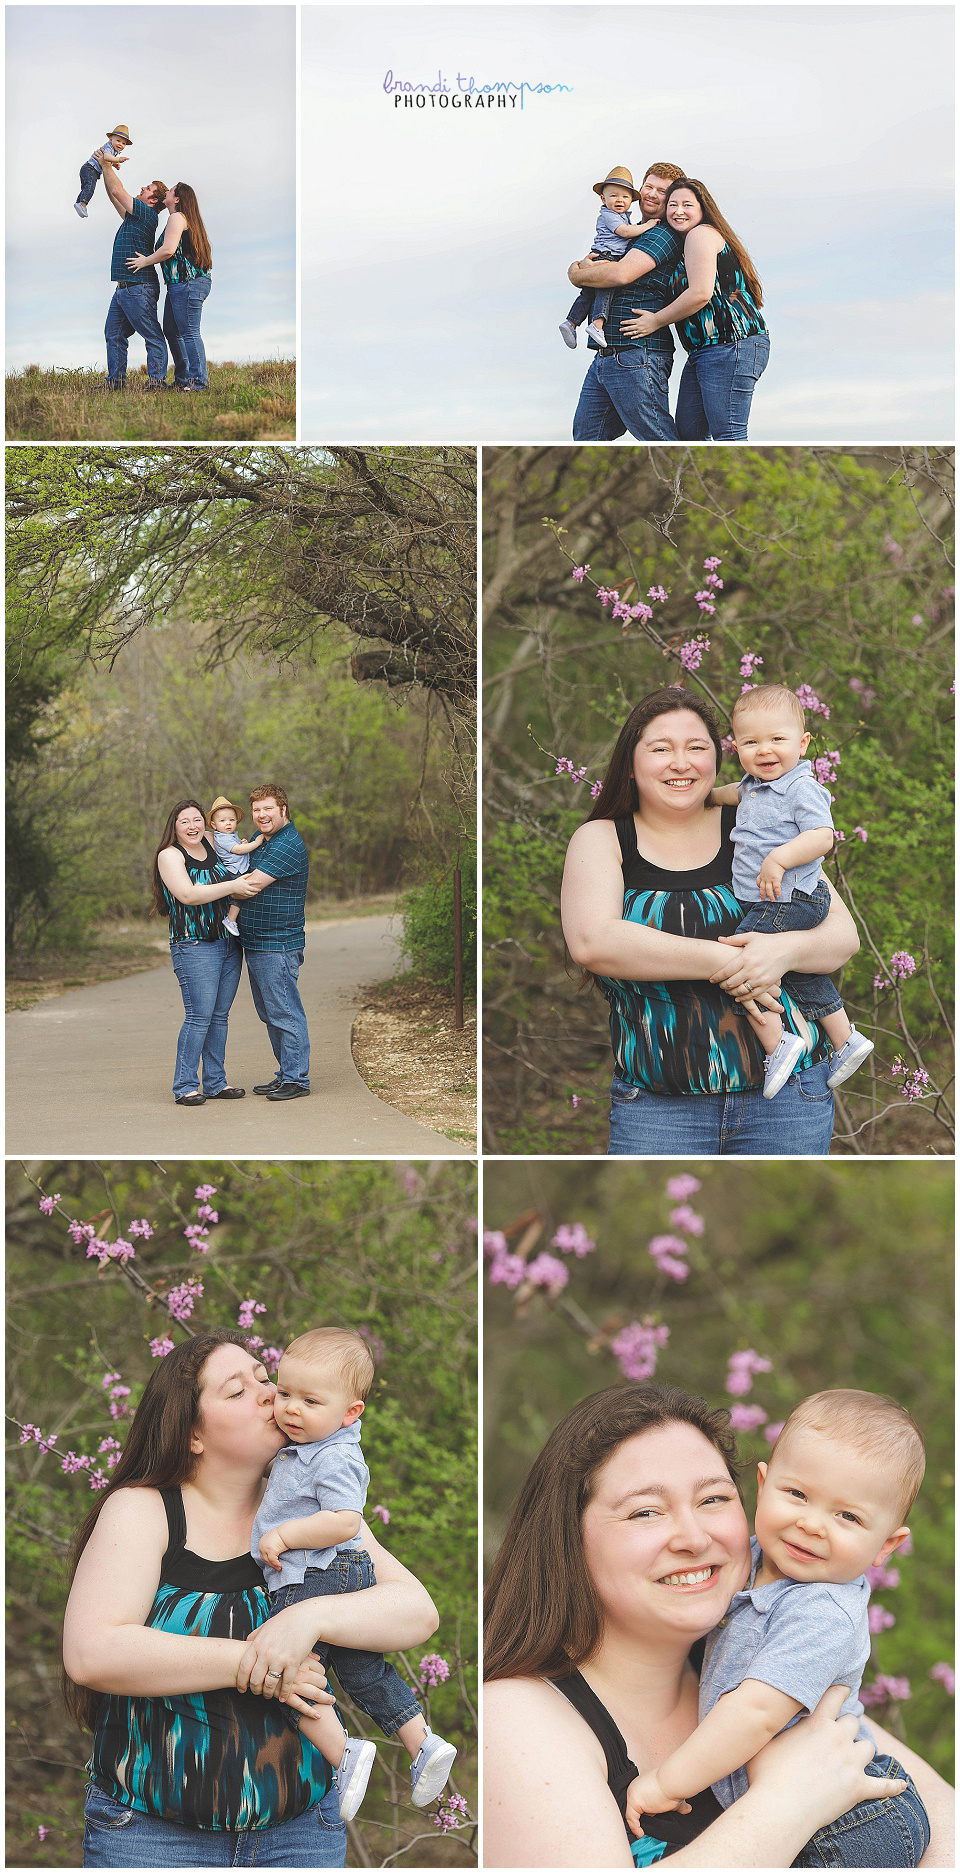 outdoor family photos at arbor hills nature preserve in Plano,TX with a one year old boy